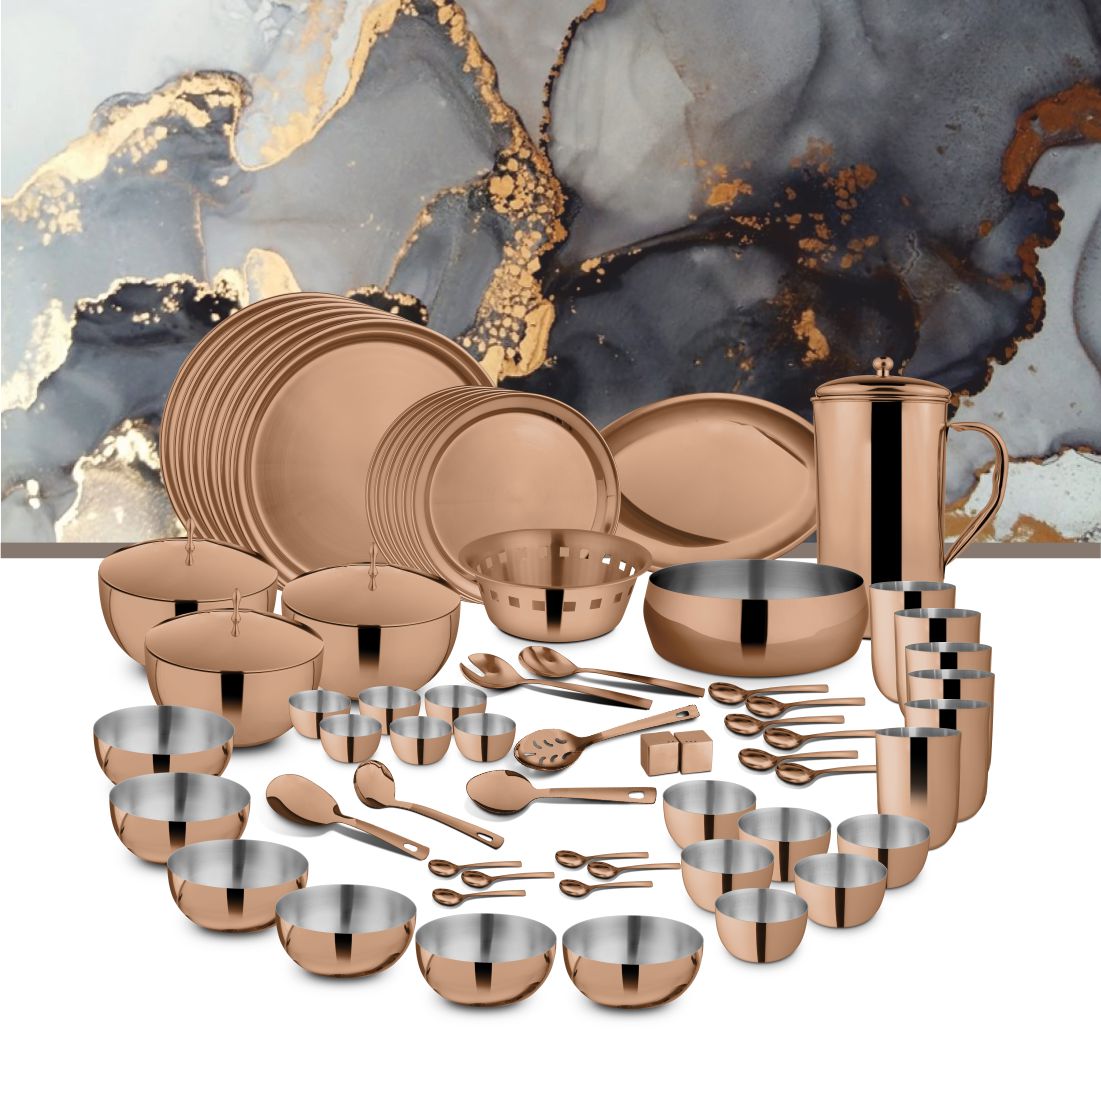 Stainless Steel 72 PCS Dinner Set (6 People) with Rose Gold PVD Coating Majestic